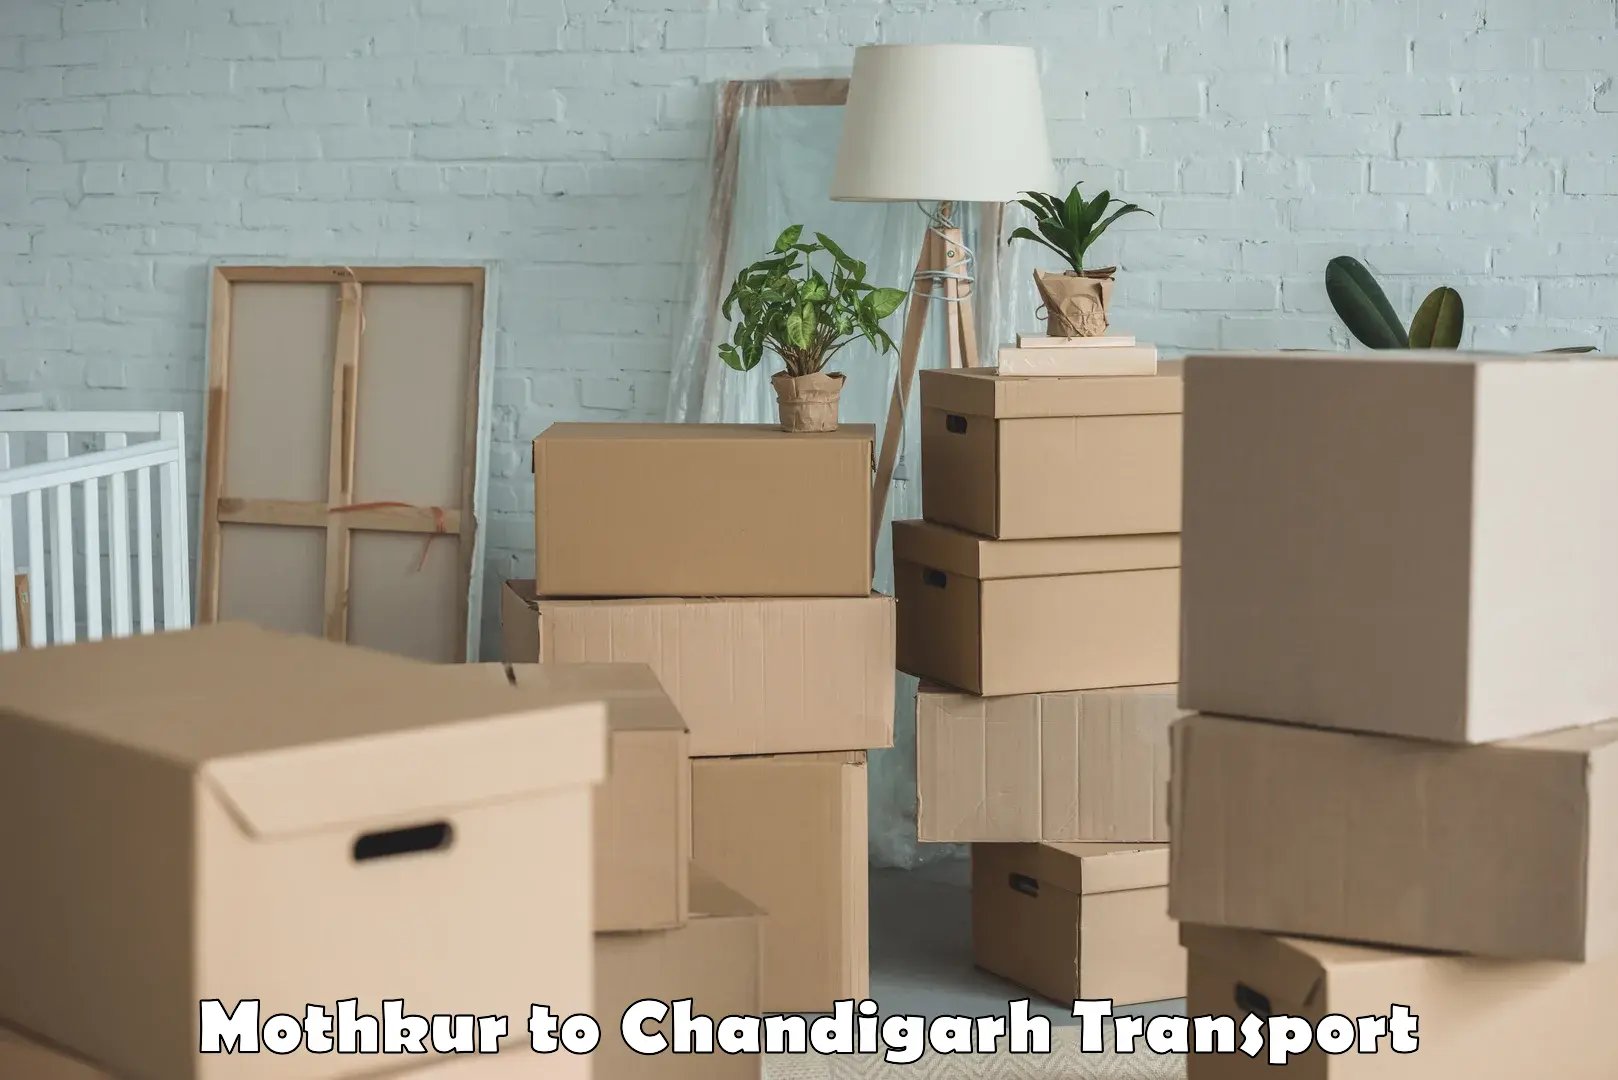 Delivery service Mothkur to Chandigarh